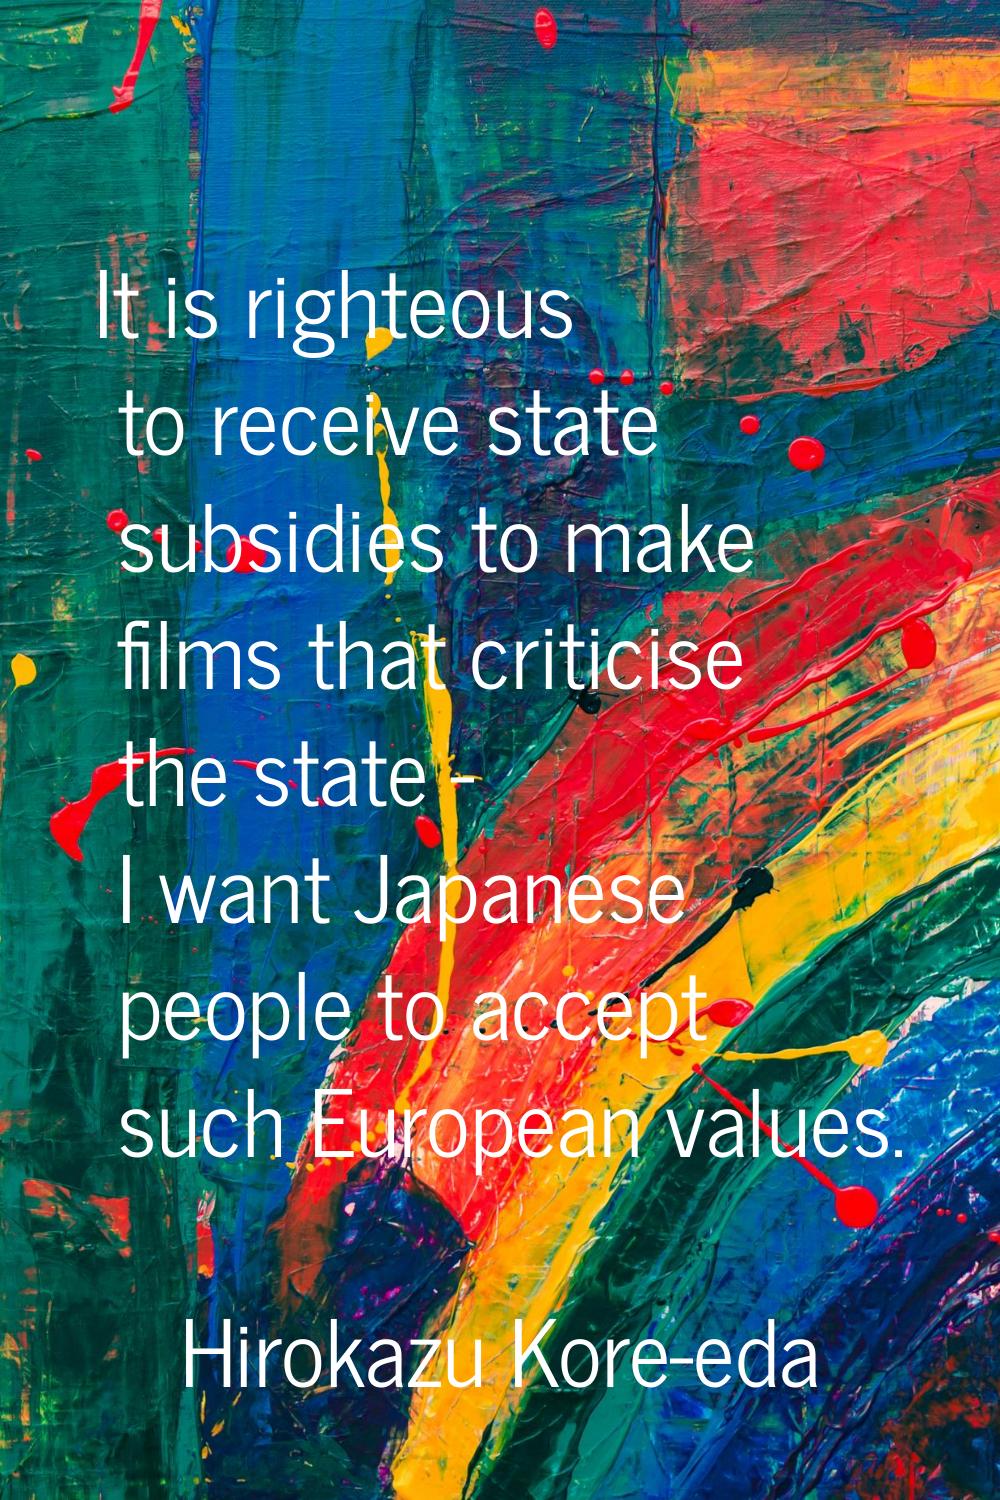 It is righteous to receive state subsidies to make films that criticise the state - I want Japanese